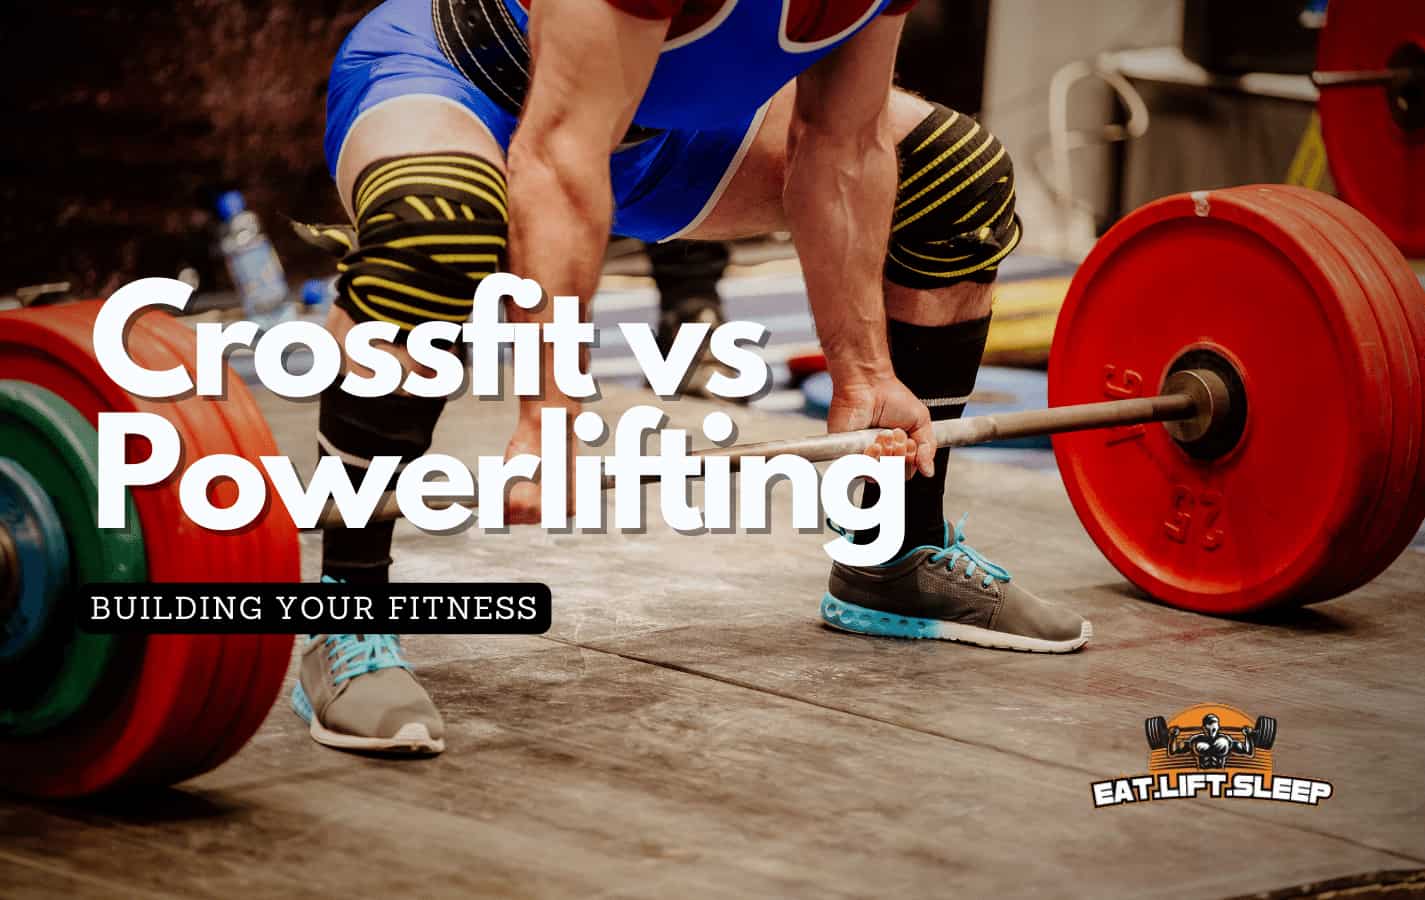 CrossFit vs Powerlifting: Which One Will Build More Muscle?